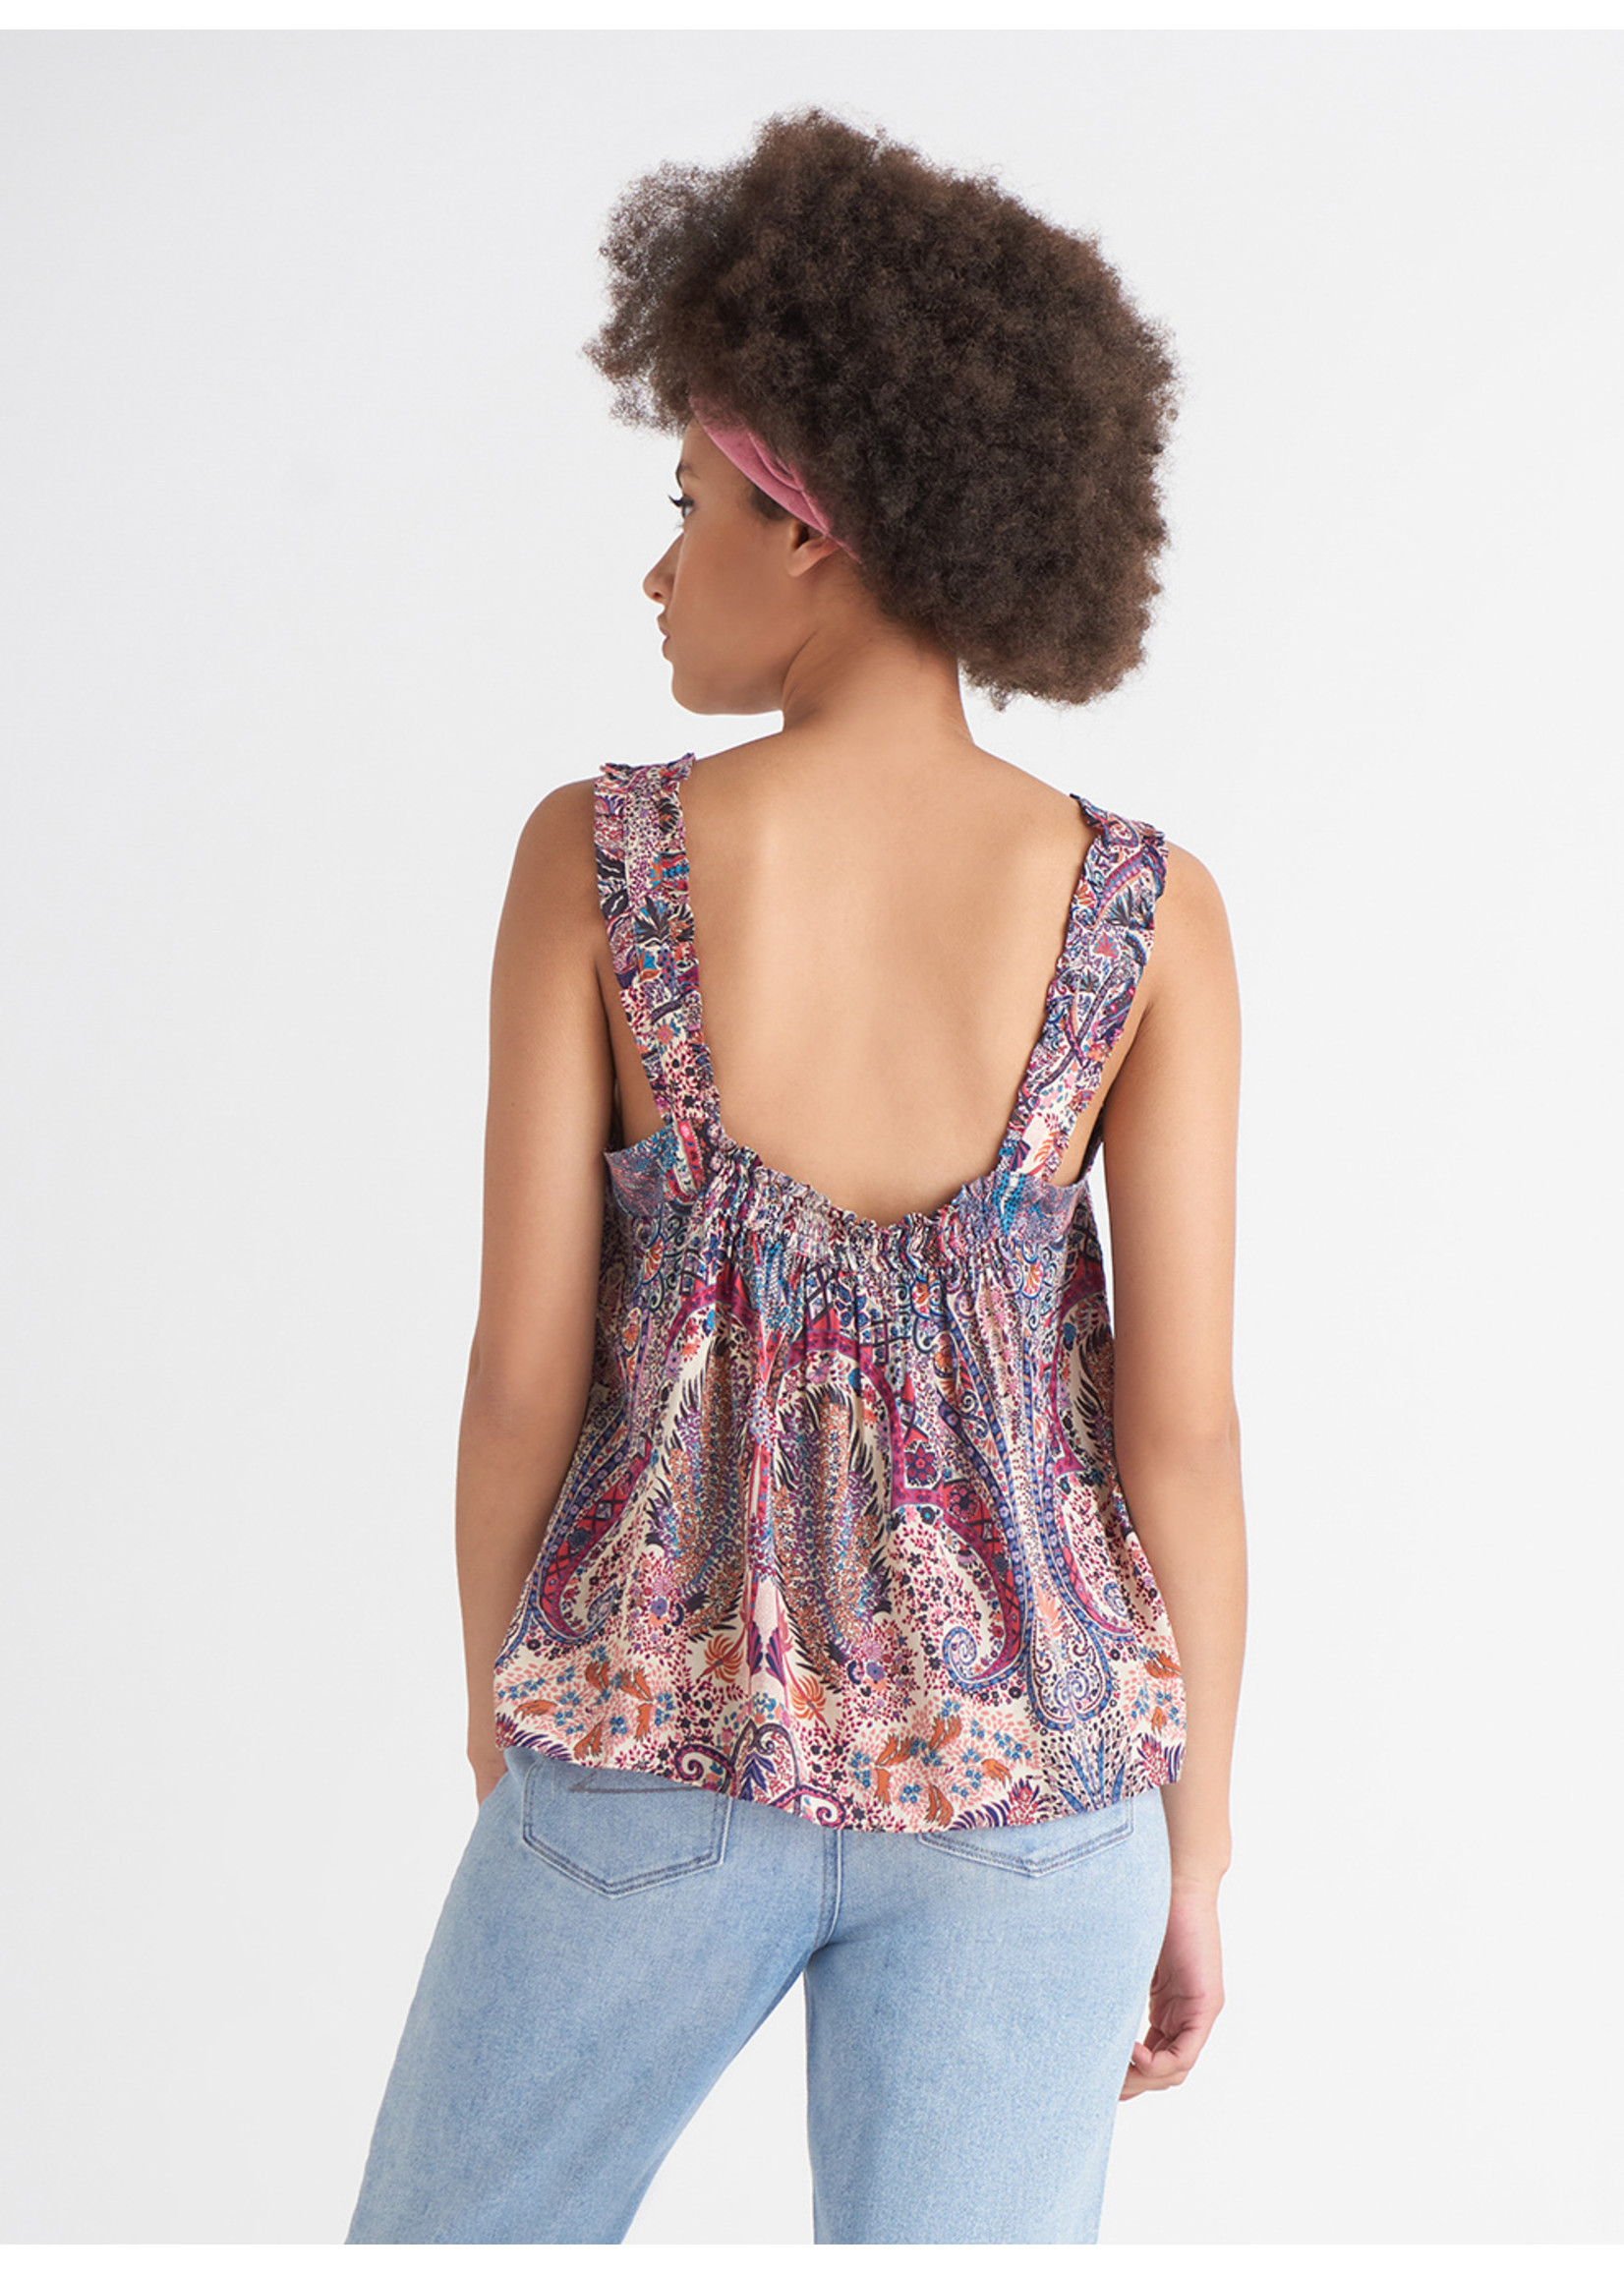 Dex Clothing Frilled Strap Cami Top